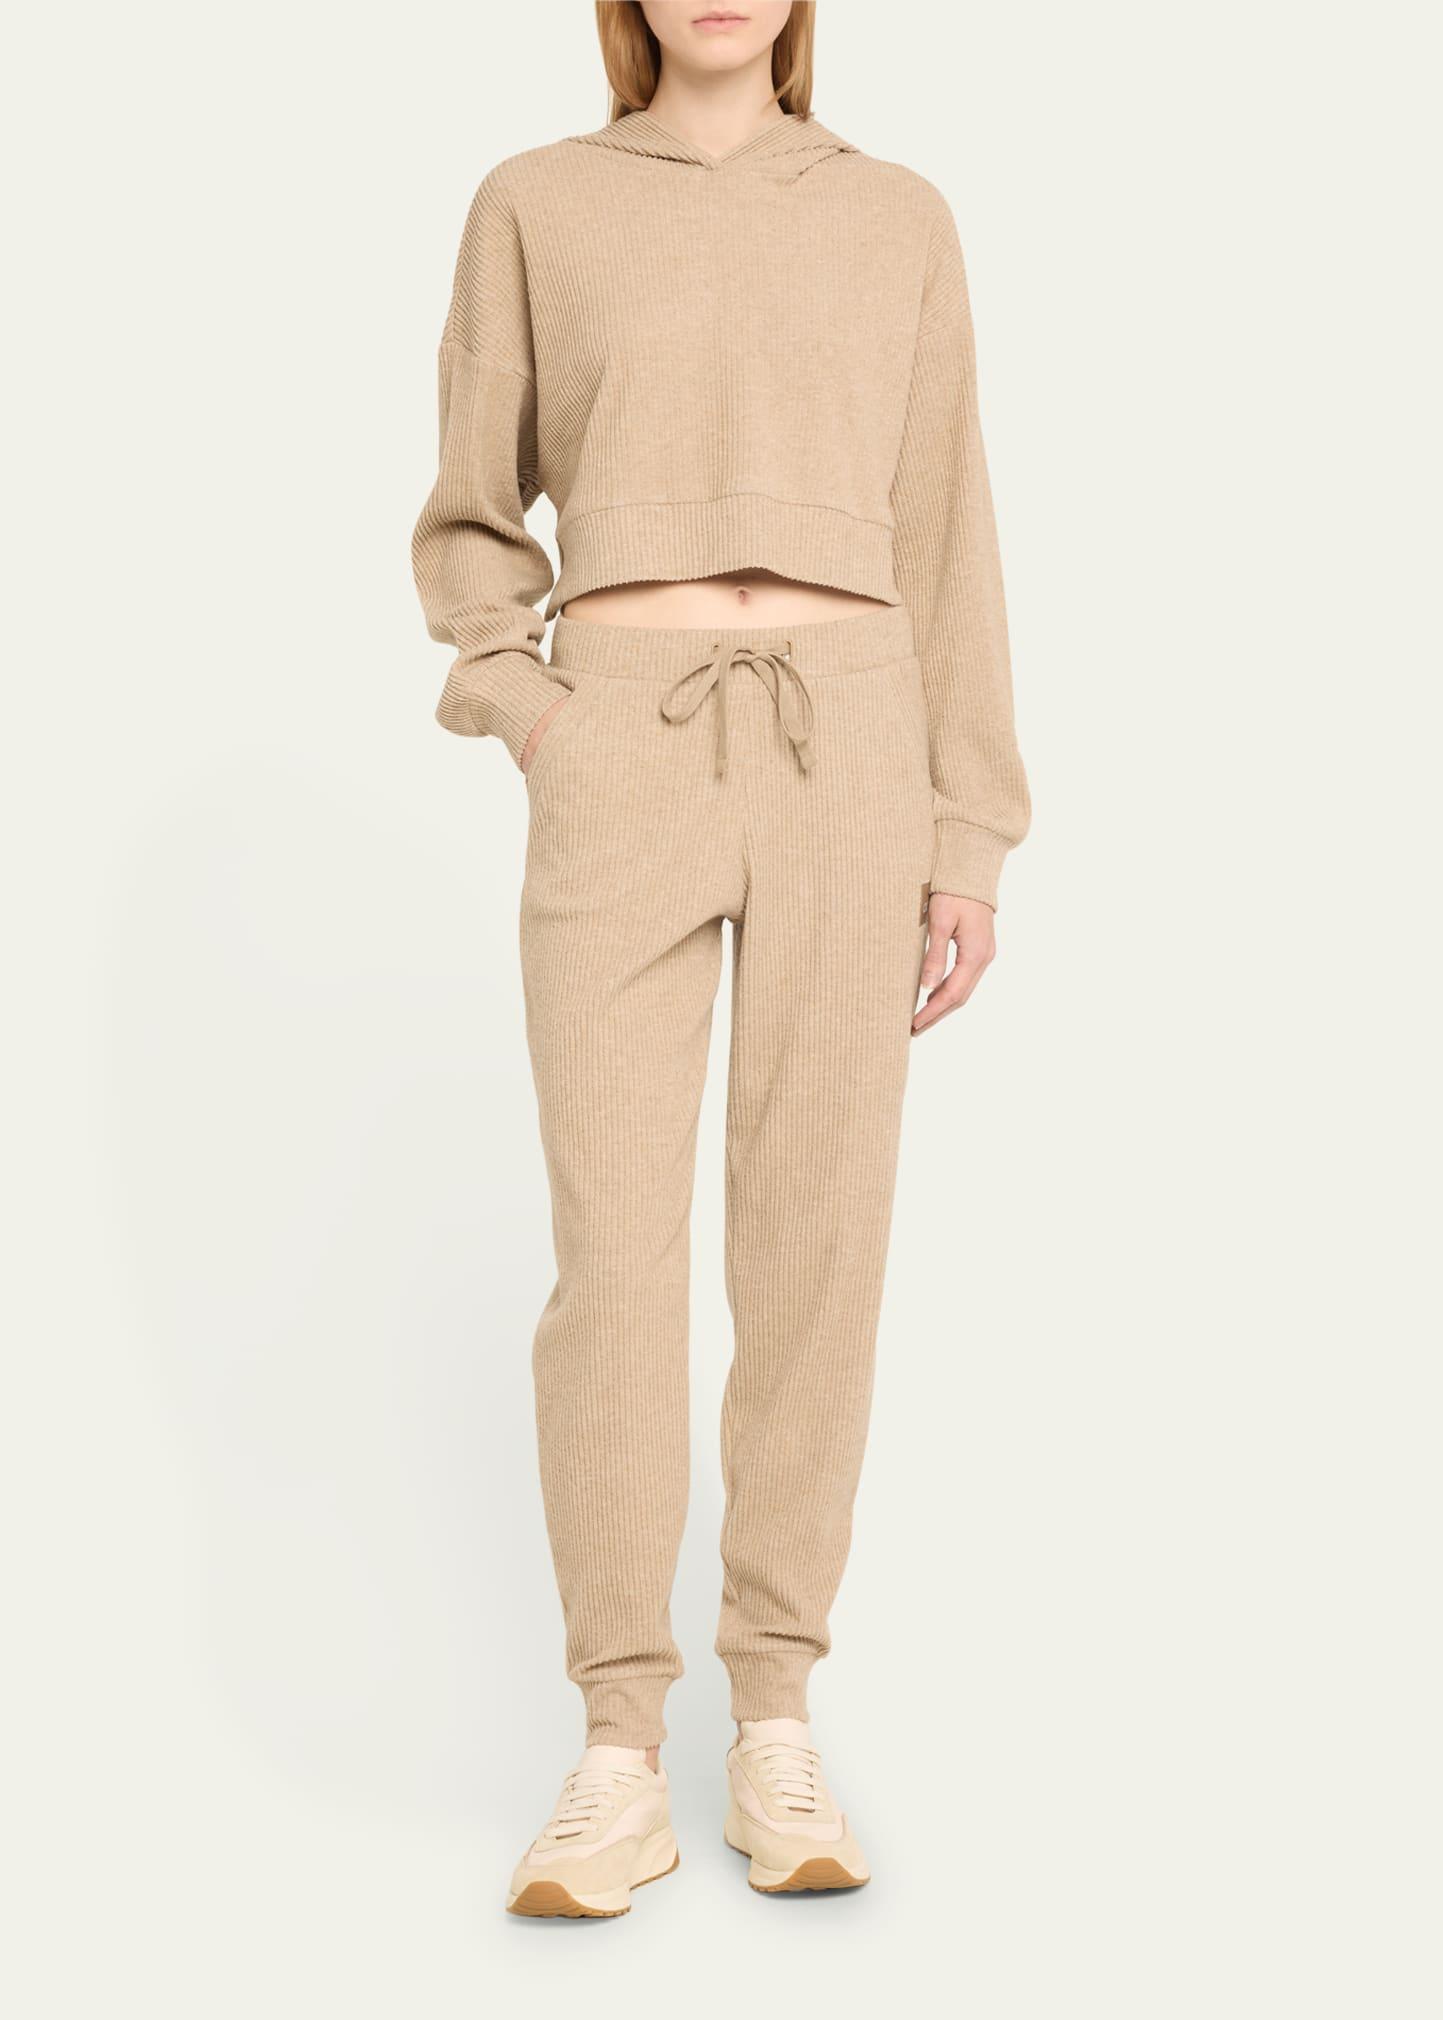 Alo Yoga Muse Sweatpants in Natural